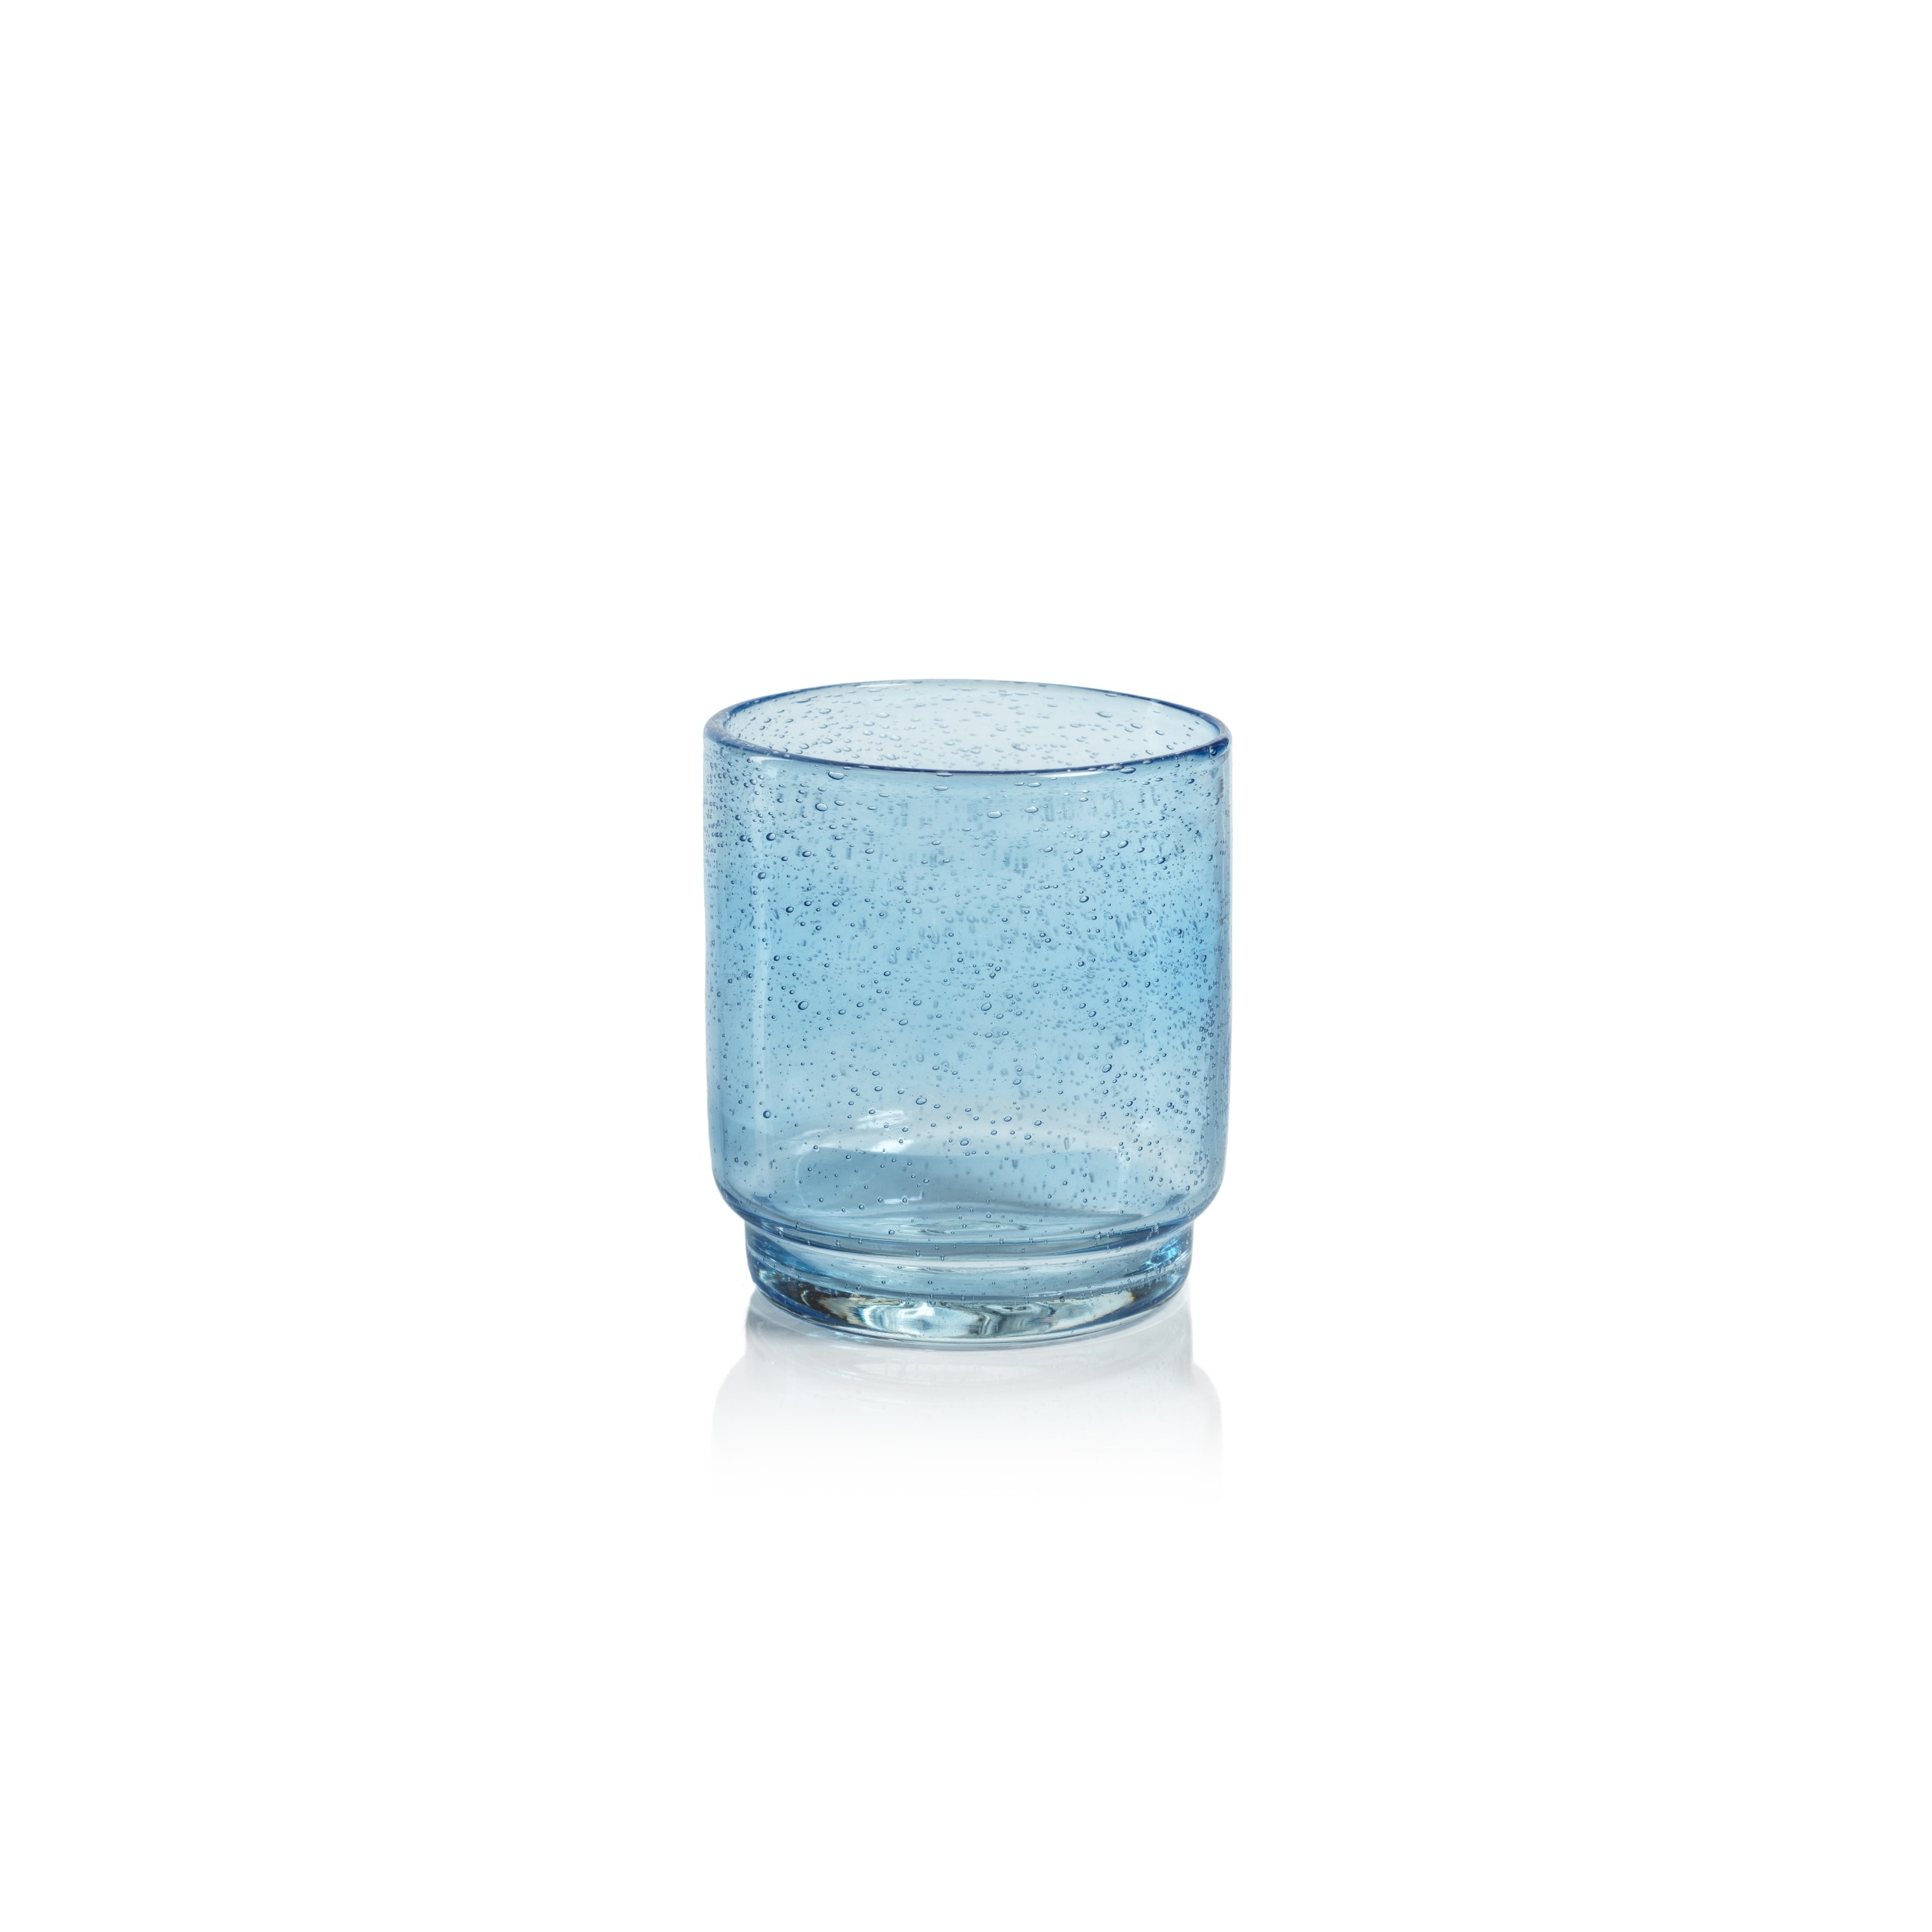 https://ak1.ostkcdn.com/images/products/is/images/direct/4f940e677907500f4339084707677b744f9510ad/Bitonto-Bubbled-Glass-Tumblers%2C-Set-of-6.jpg